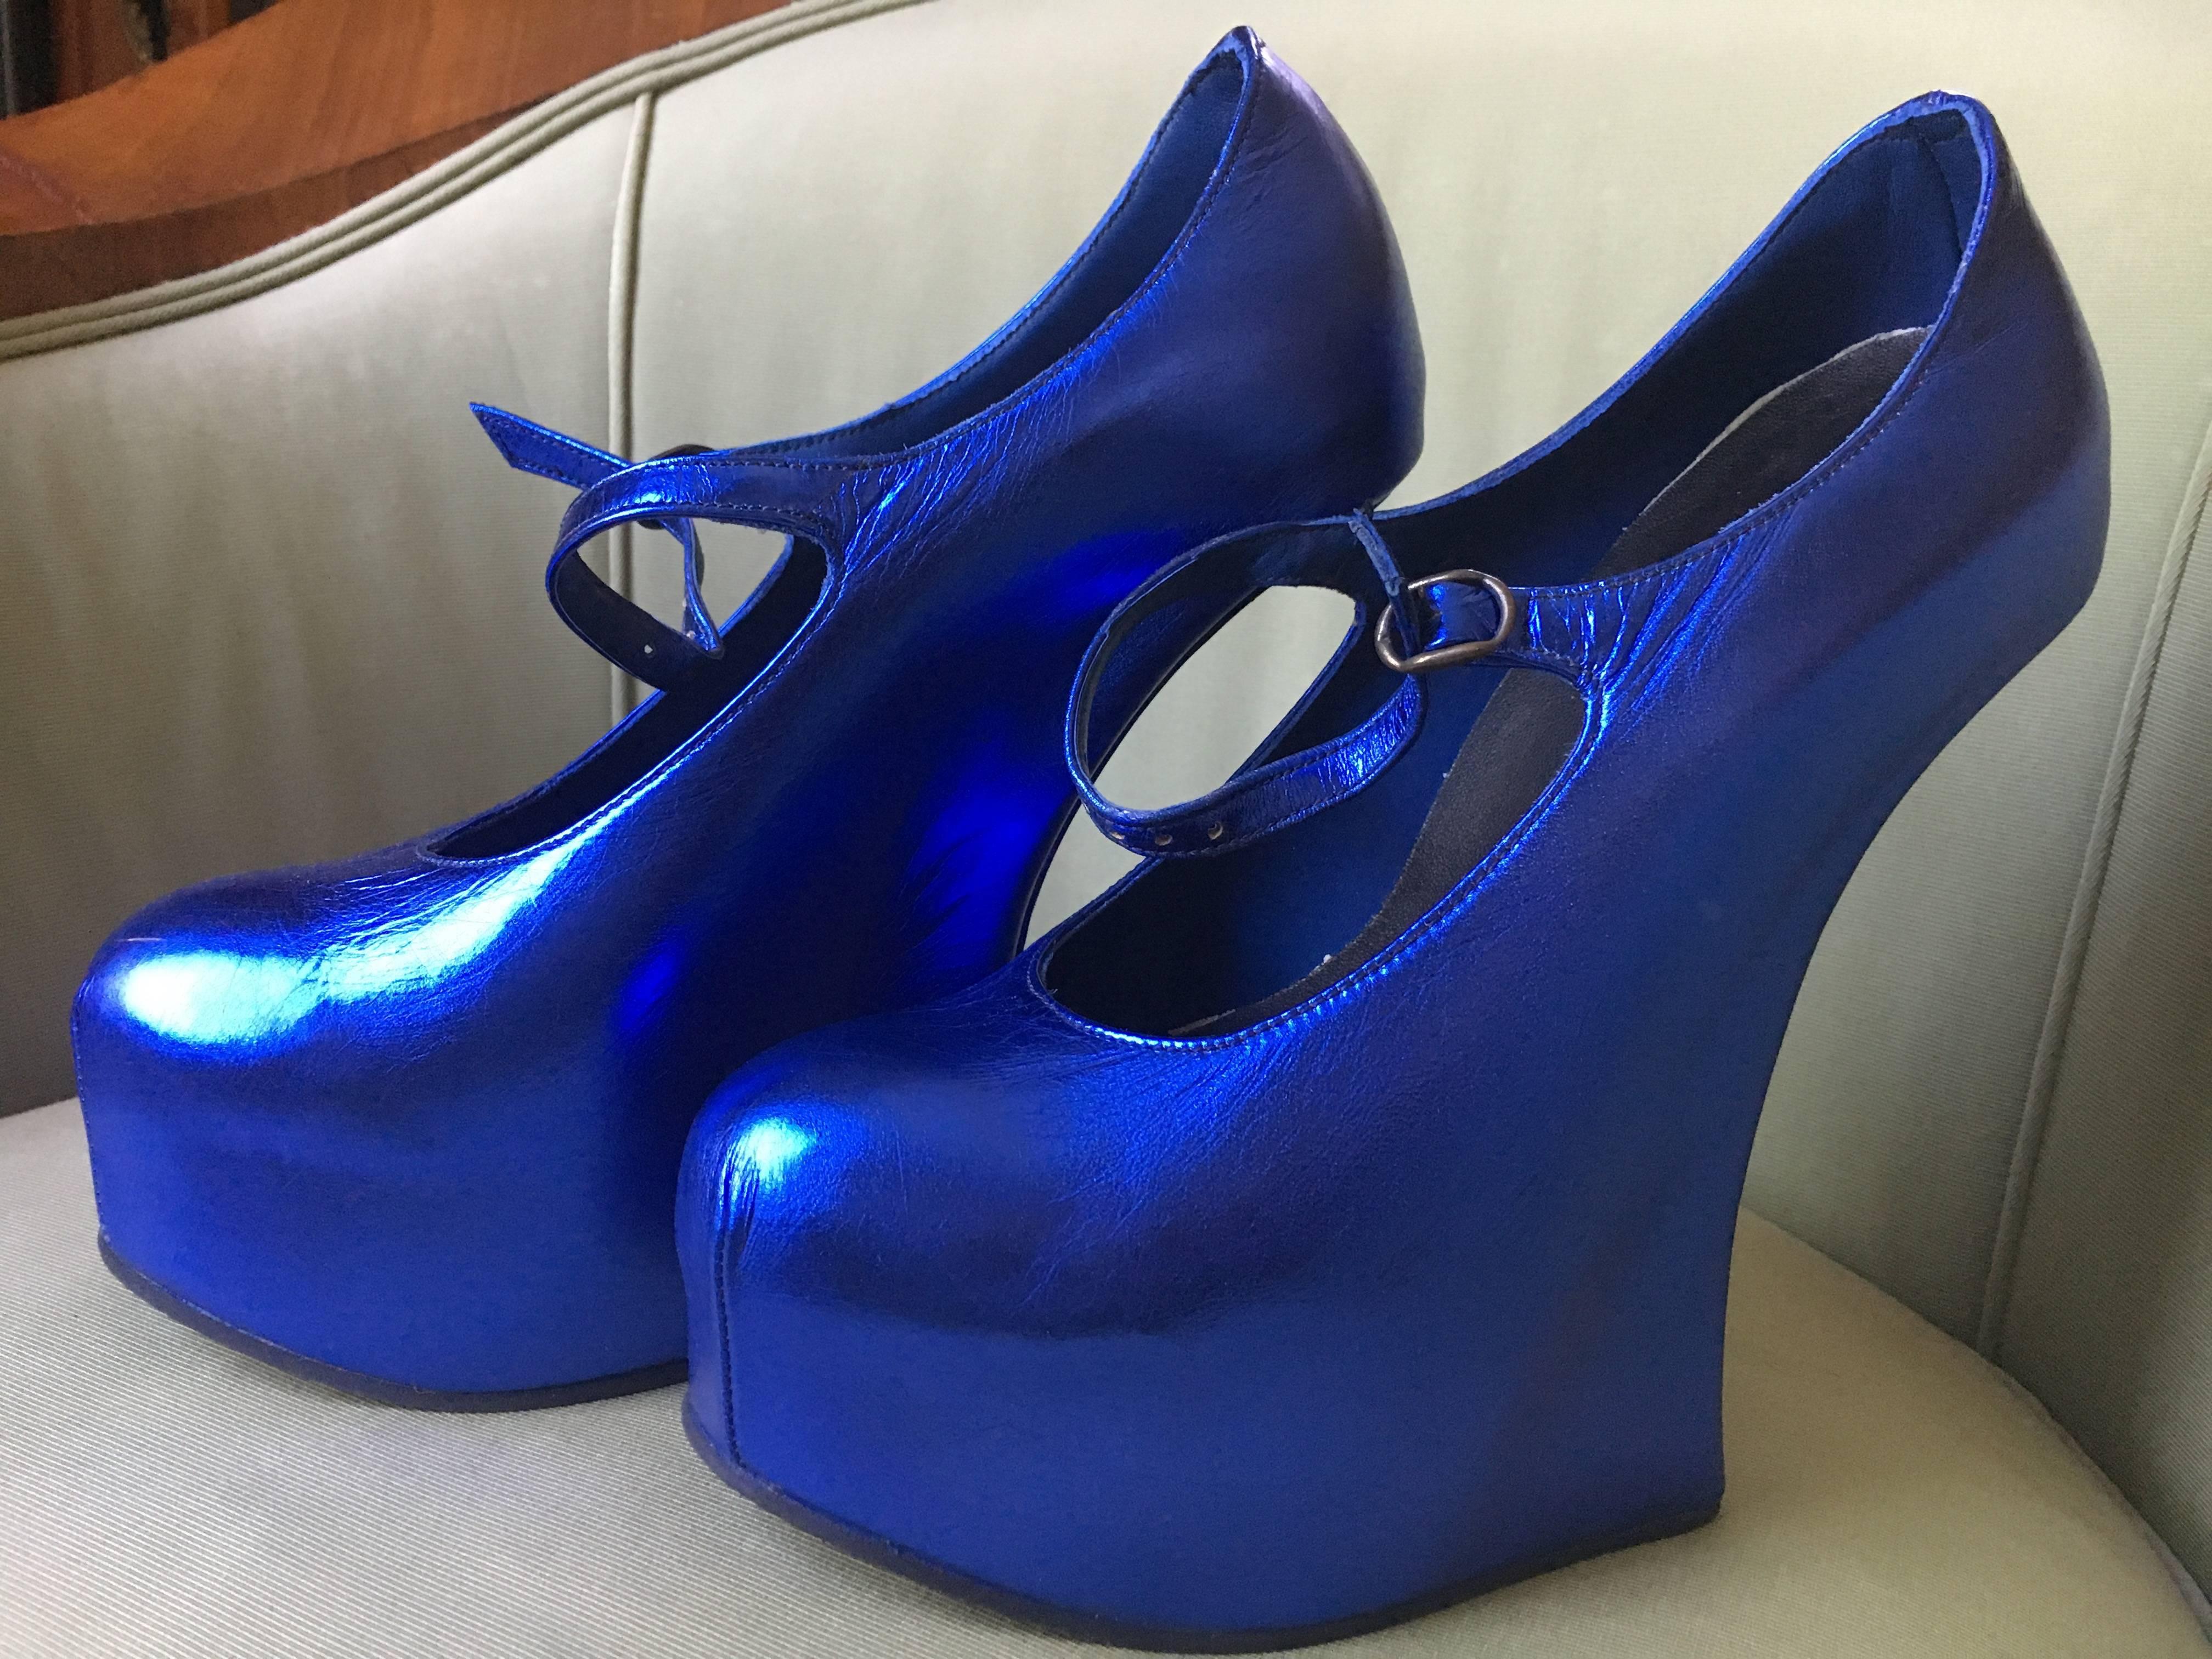 Natacha Marro London Neon Blue Metallic Leather Heelless Platform Mary Jane Pump In Excellent Condition For Sale In Cloverdale, CA